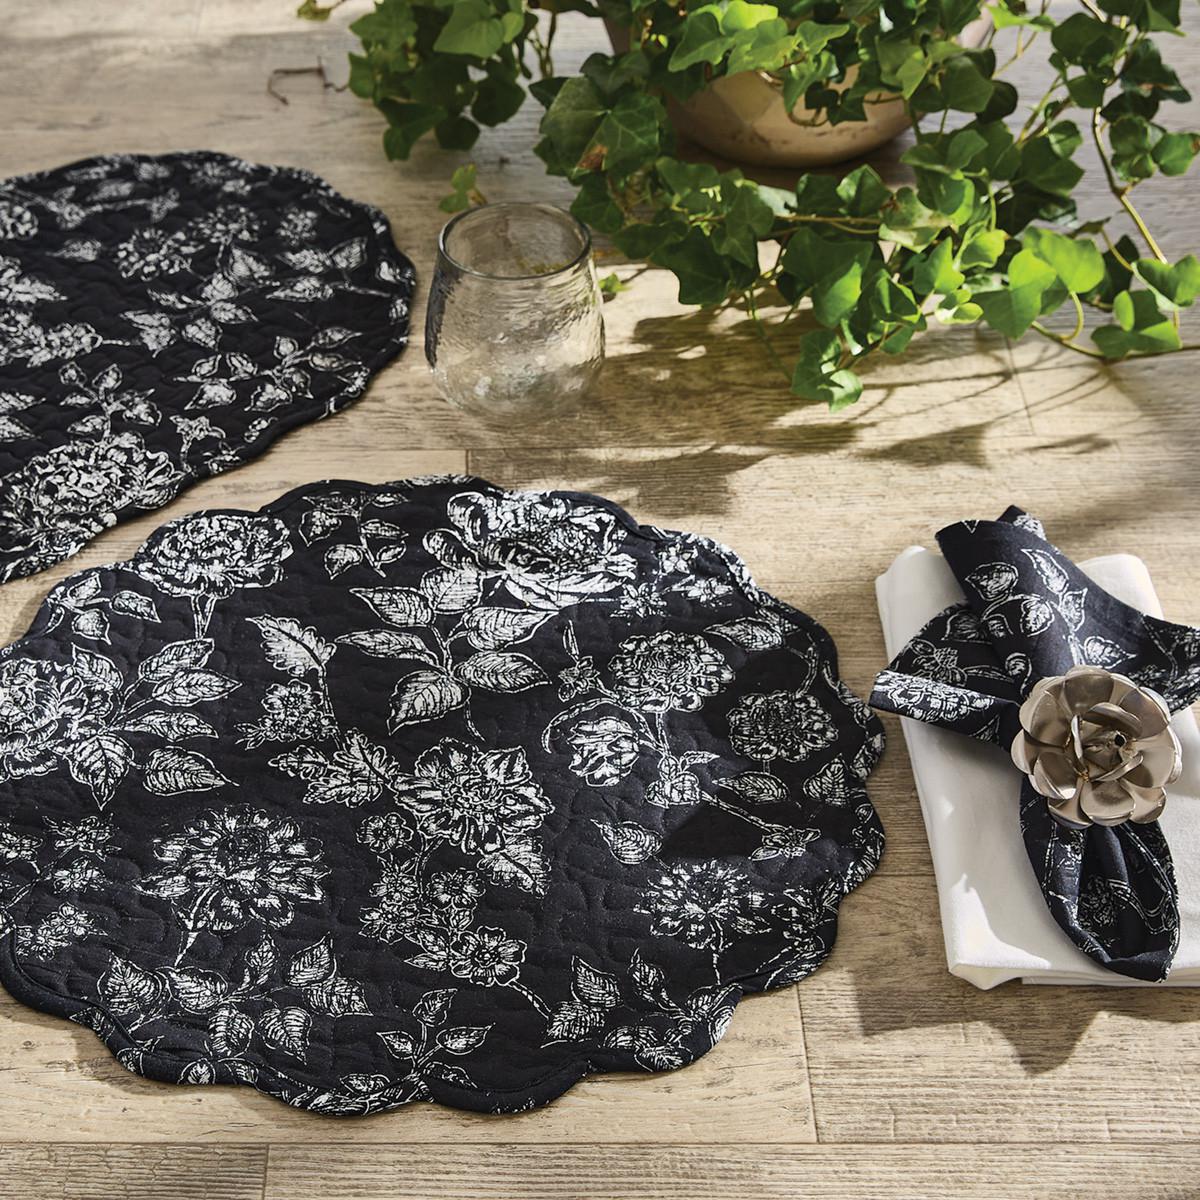 Park Design Blooming Round Placemat